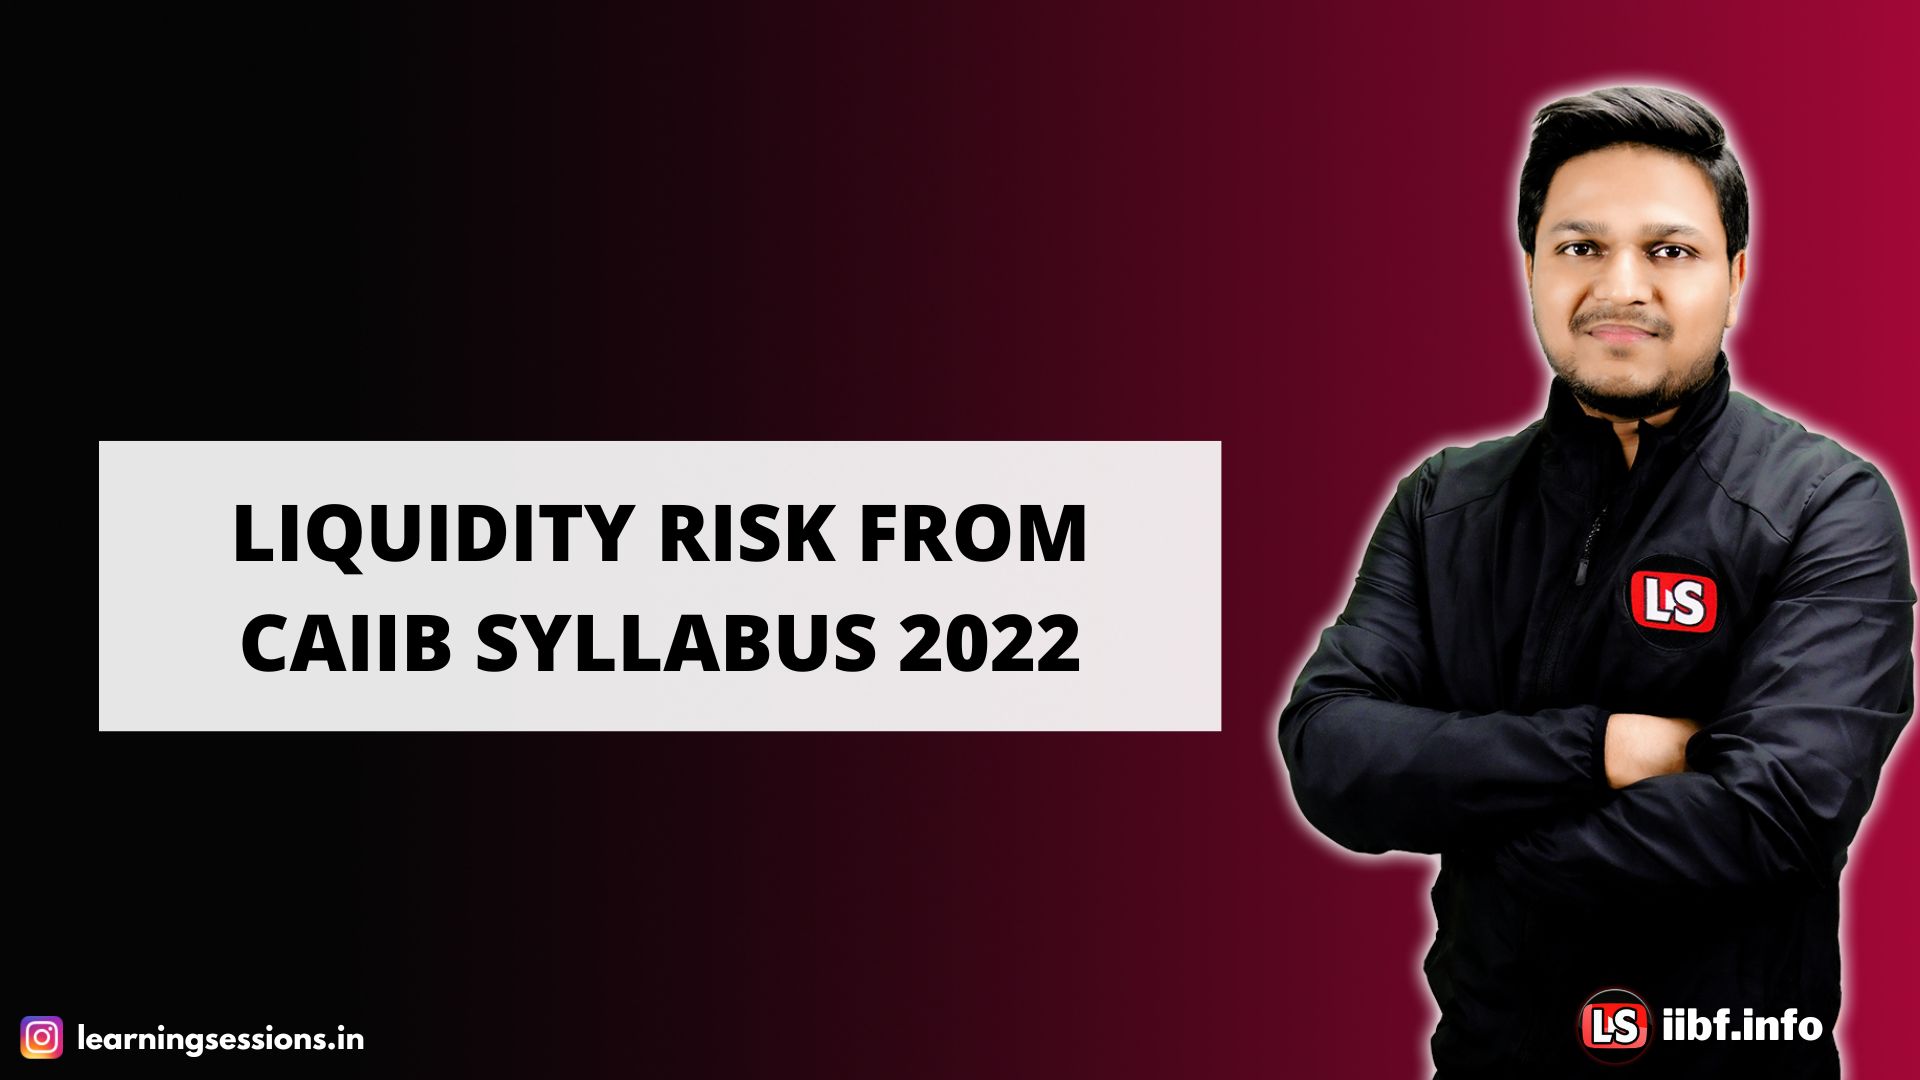 LIQUIDITY RISK FROM CAIIB SYLLABUS 2022